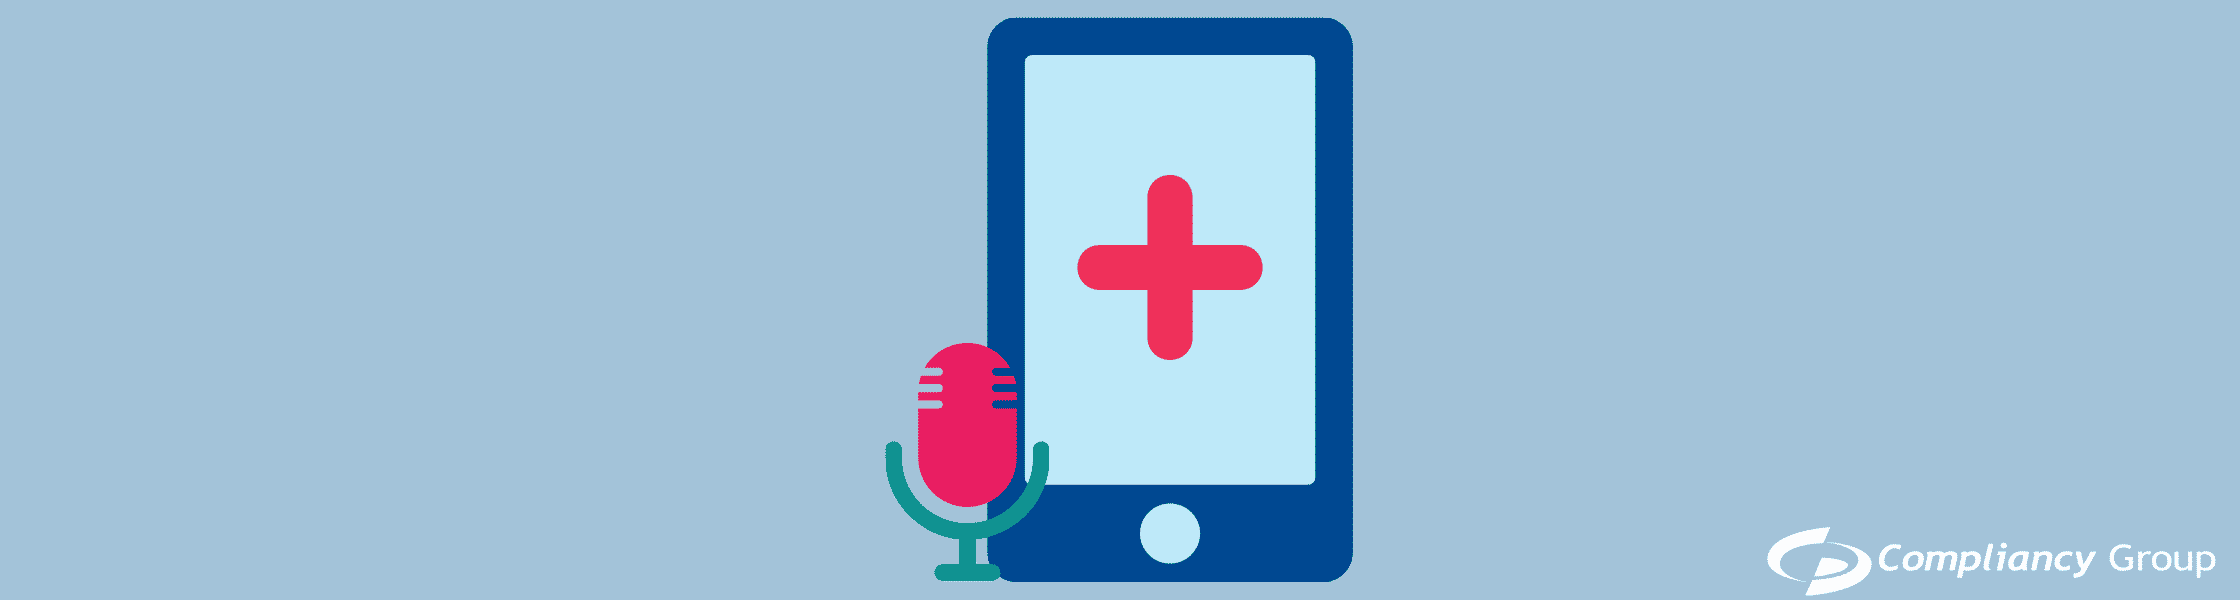 HIPAA Compliant Apps with Microphone Access